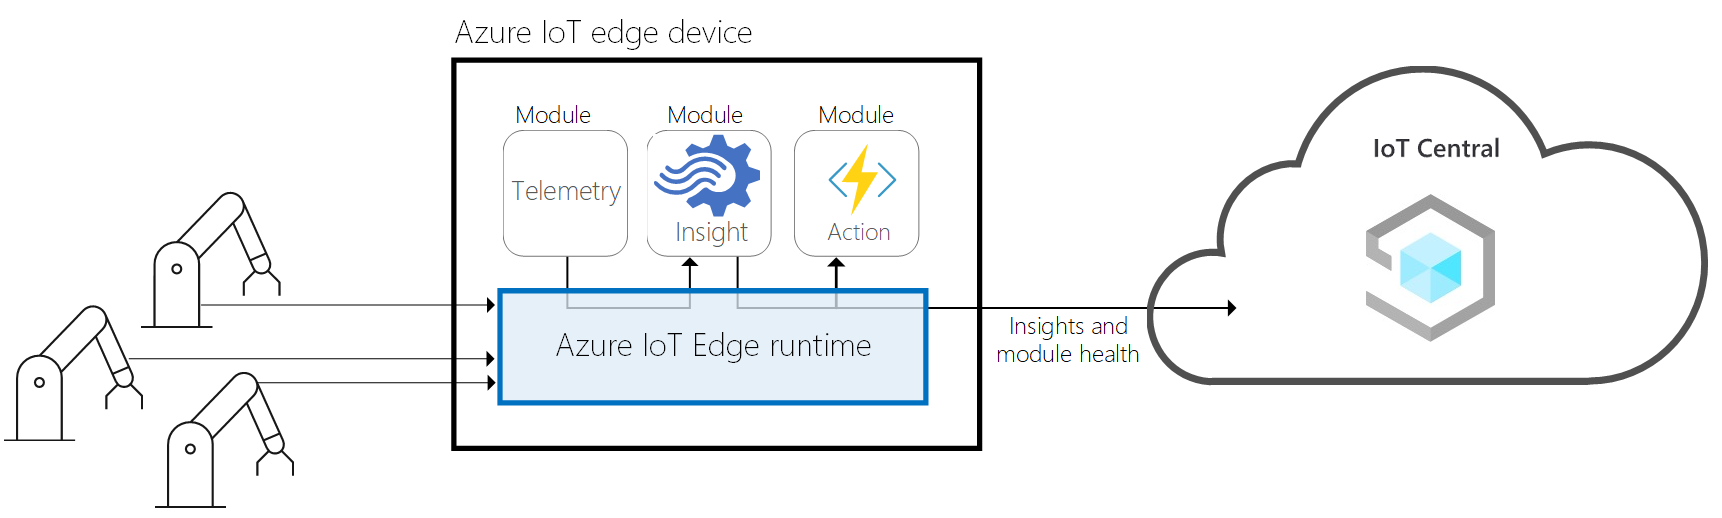 Azure IoT Edge y Azure IoT Central | Microsoft Learn